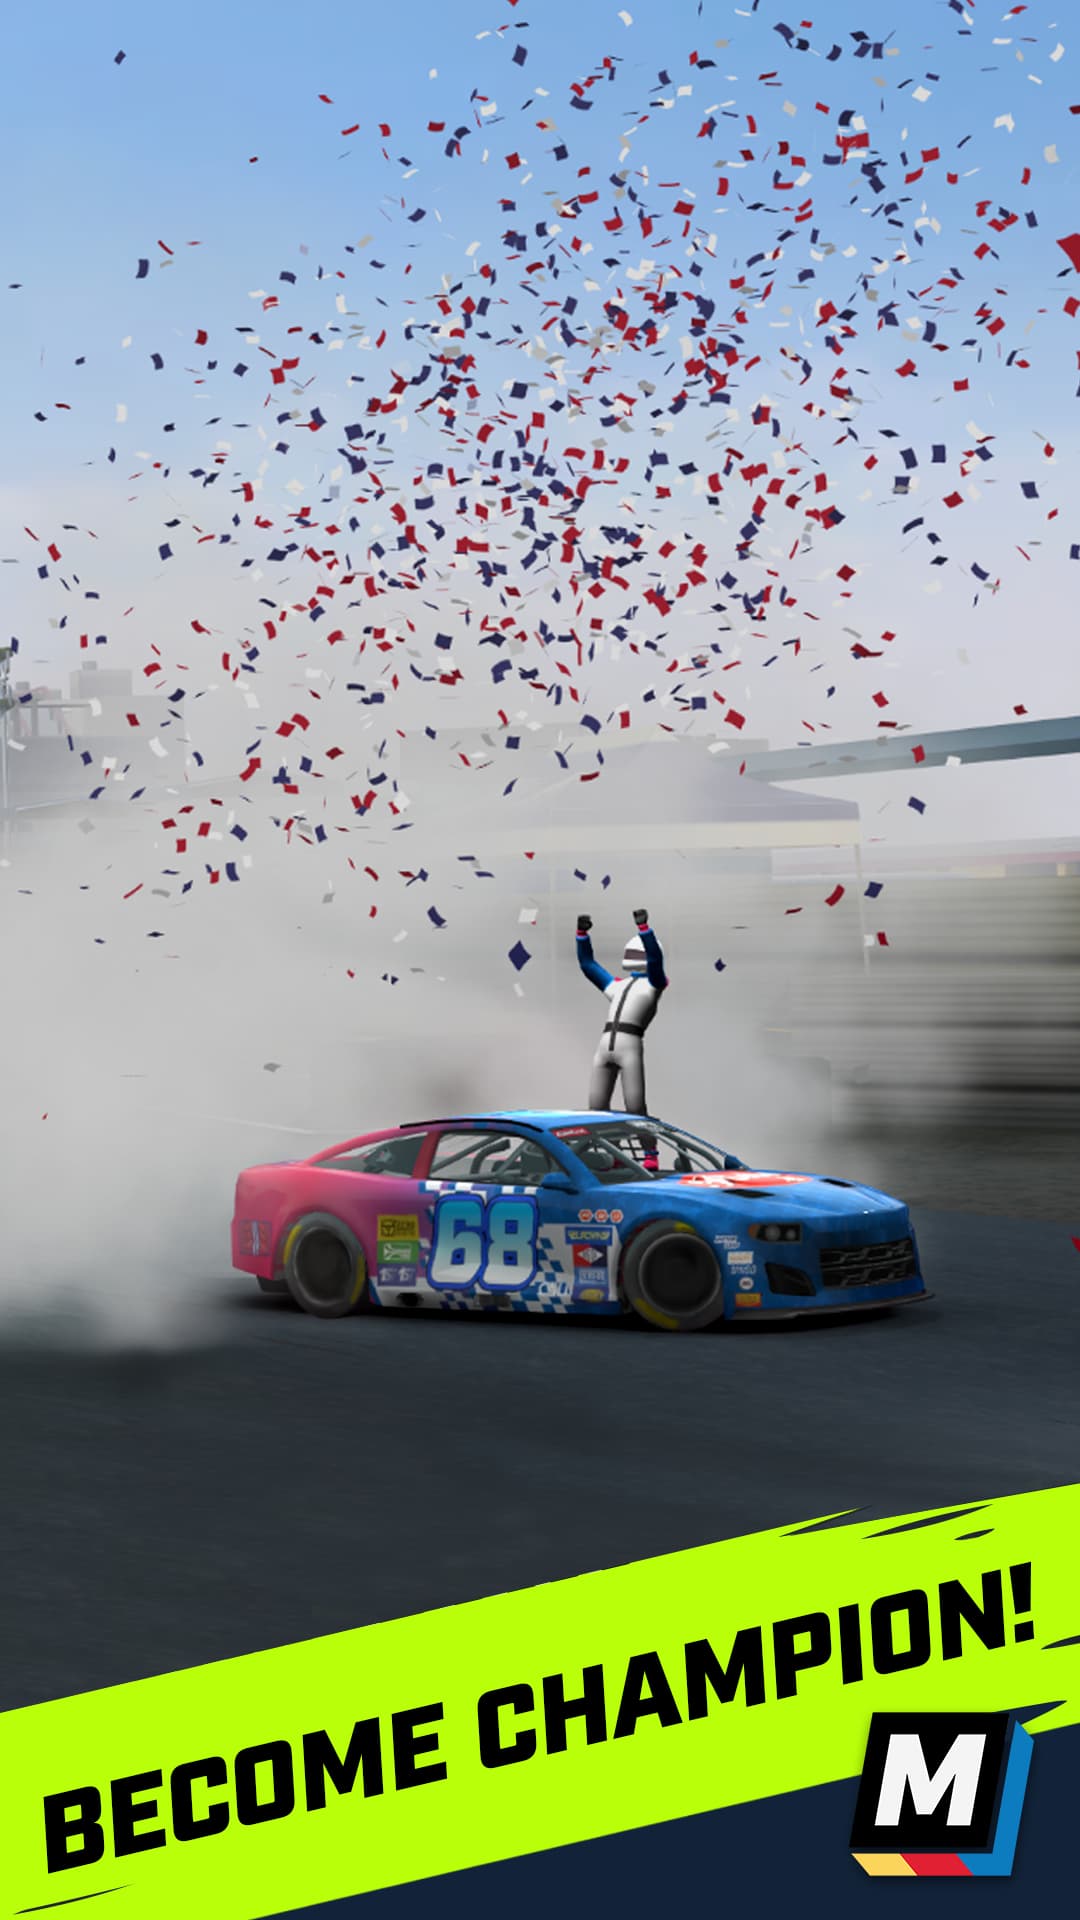 NASCAR Manager APK - Download and Manage Your Racing Team